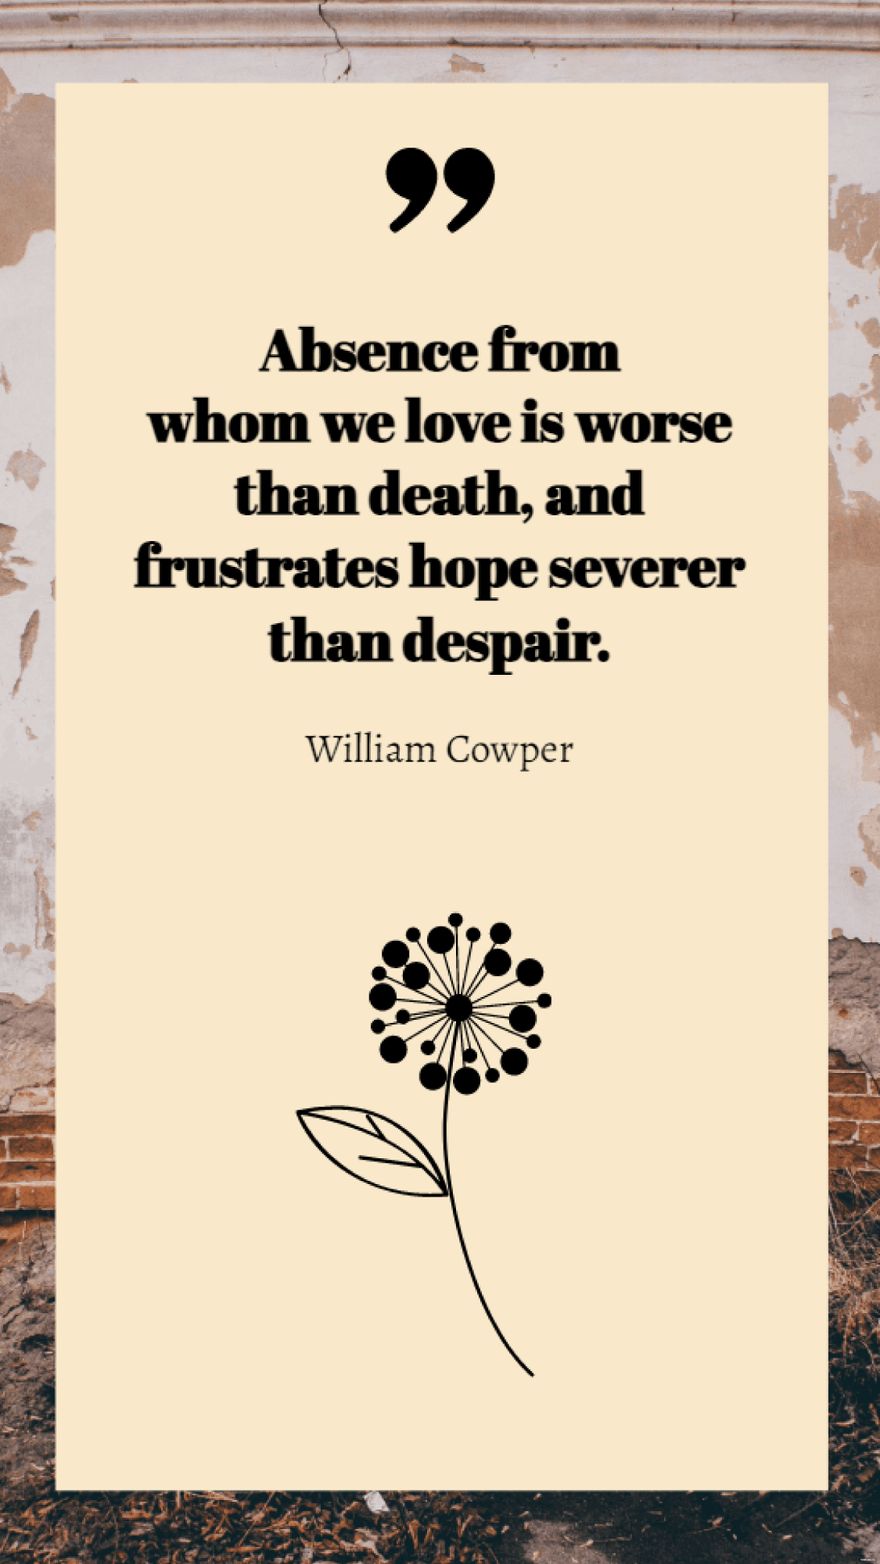 William Cowper - Absence from whom we love is worse than death, and frustrates hope severer than despair.